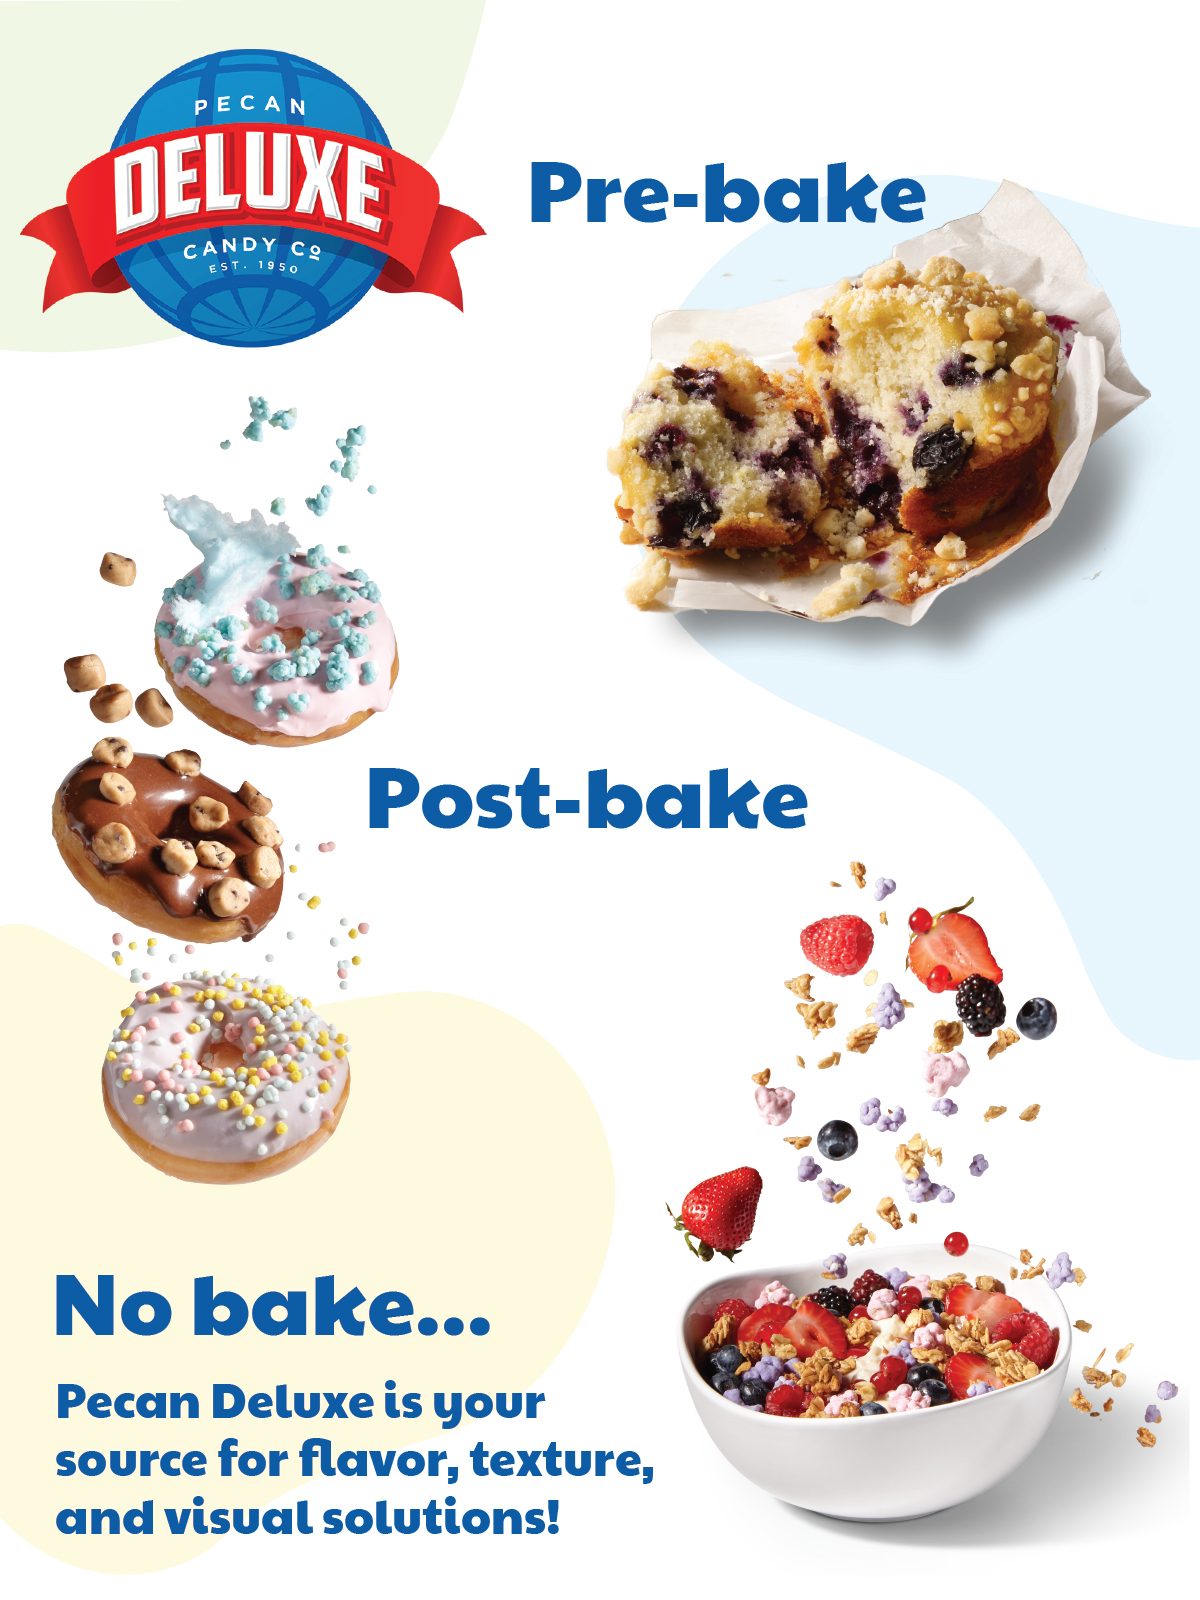 Blueberry muffins, Strawberries, Granola, Donuts, Logos, Font